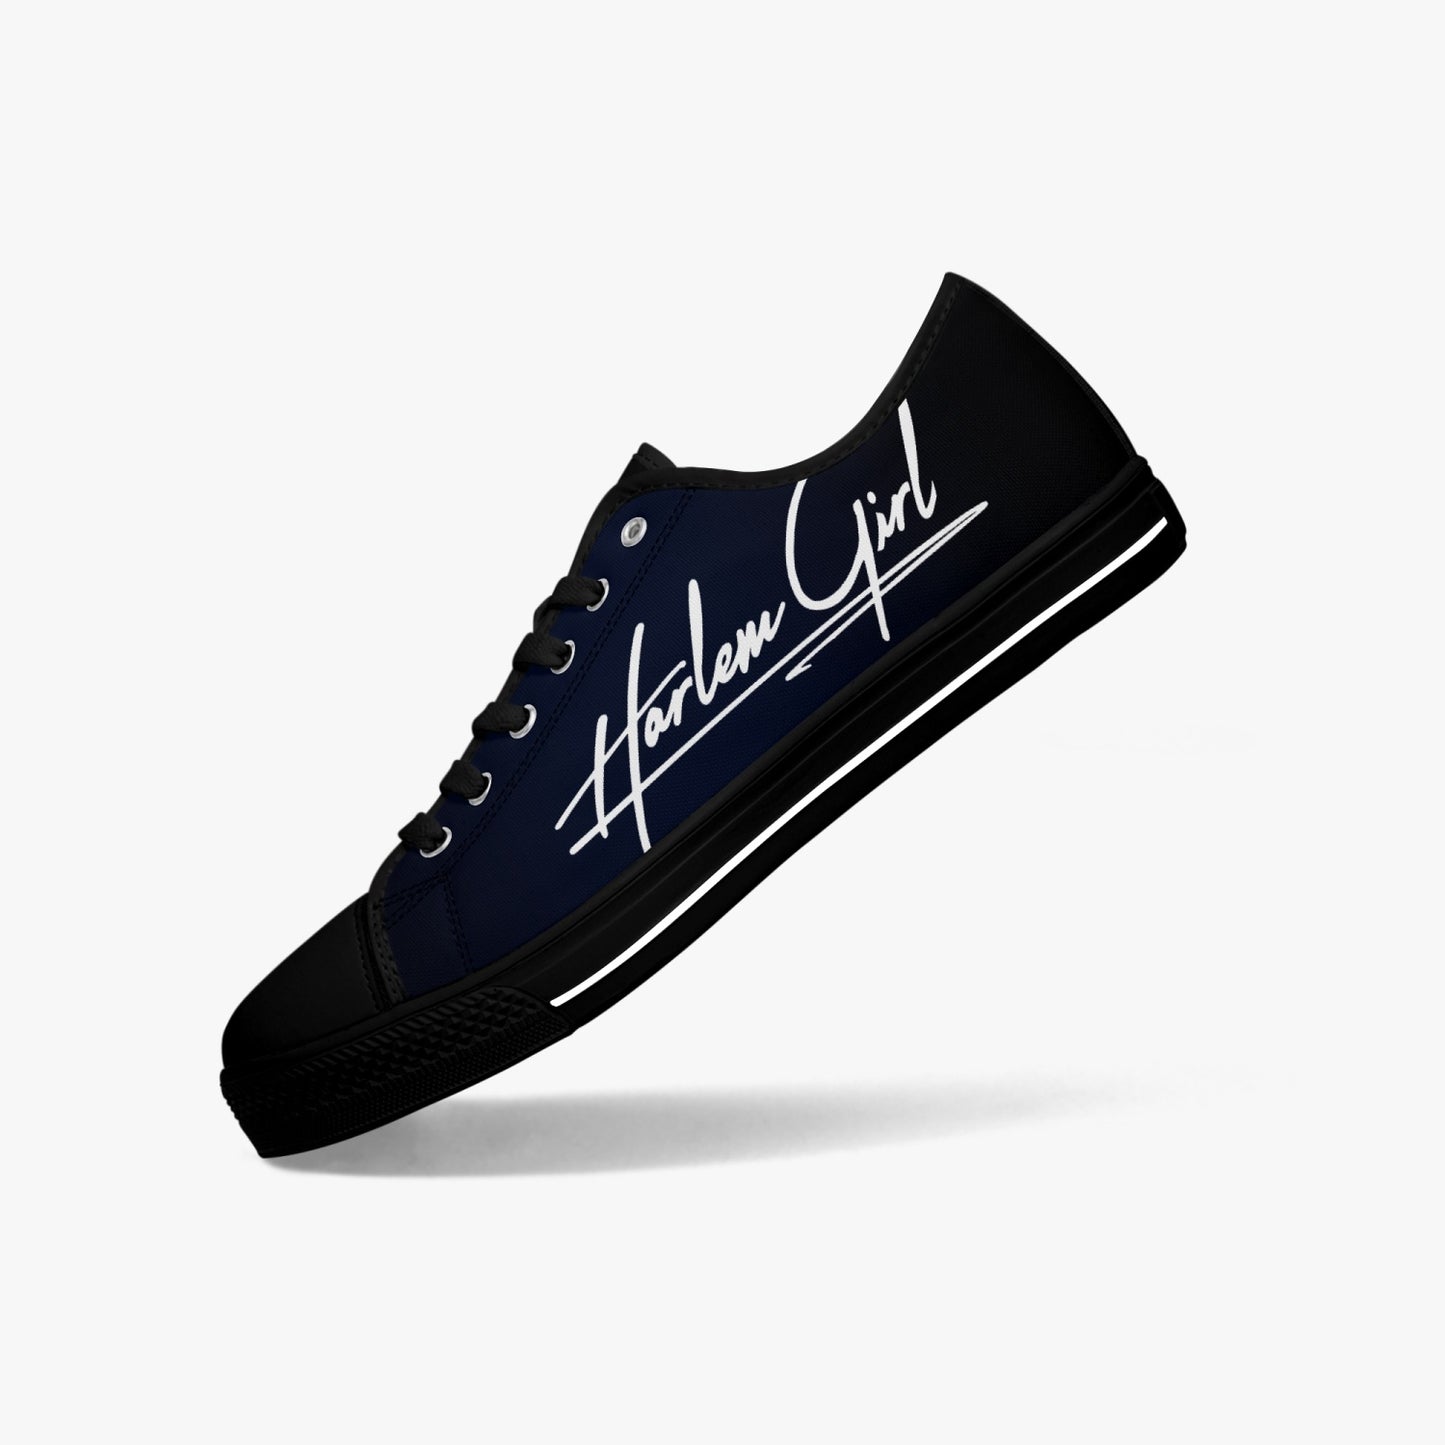 HB Harlem Girl "Lenox Ave" Classic Low Tops - BluBlac Onyx- Women (Black or White Sole)